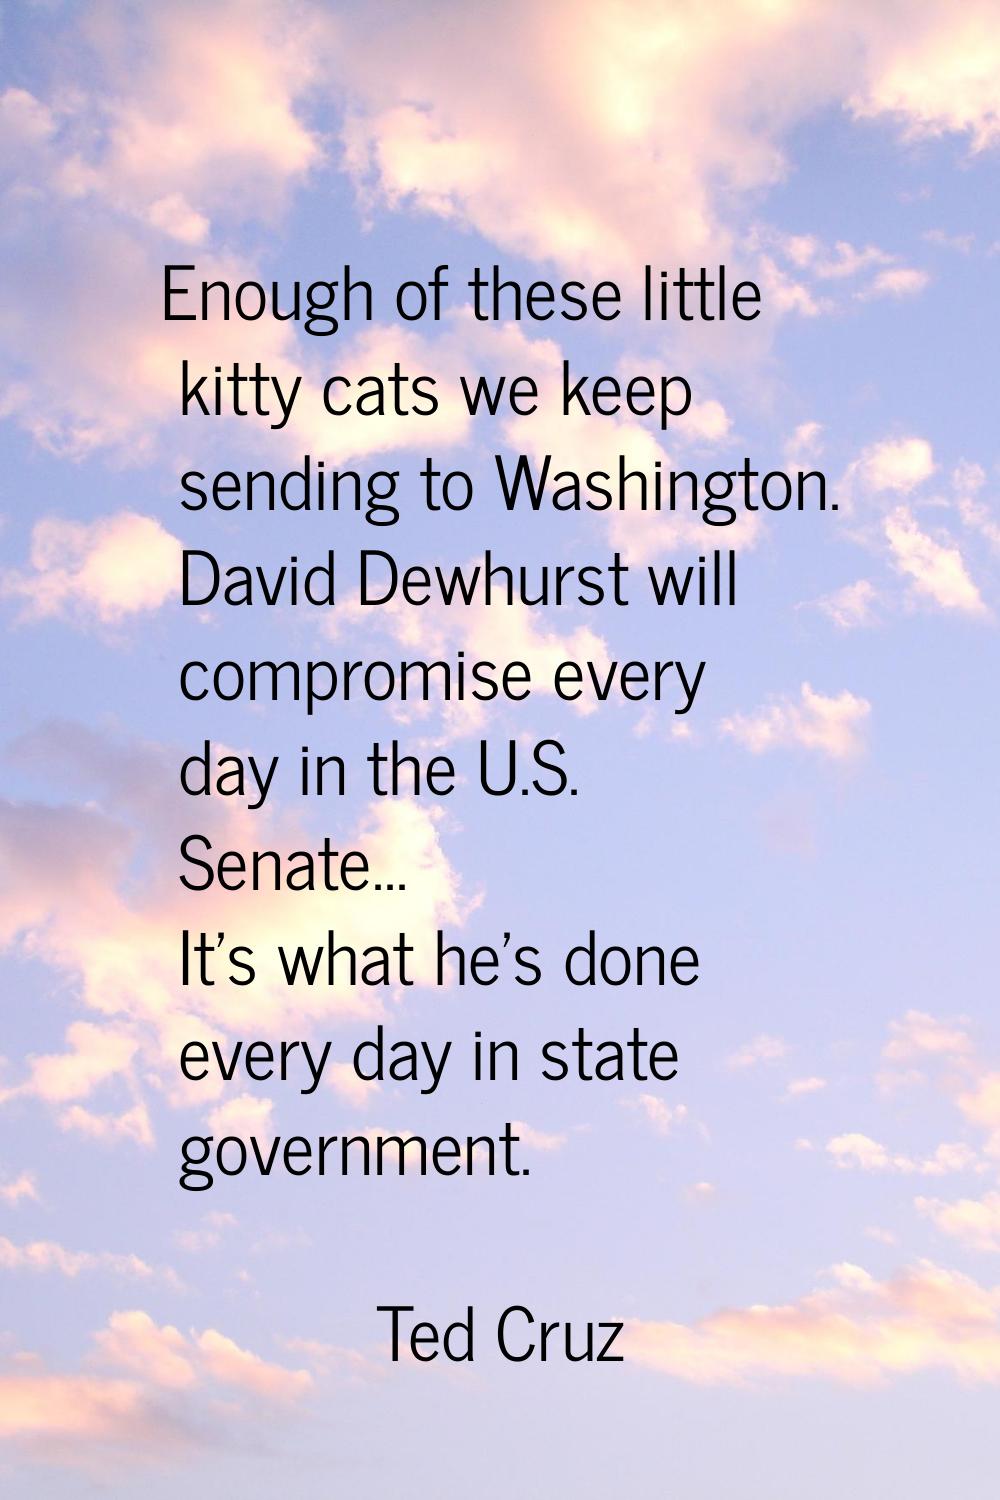 Enough of these little kitty cats we keep sending to Washington. David Dewhurst will compromise eve